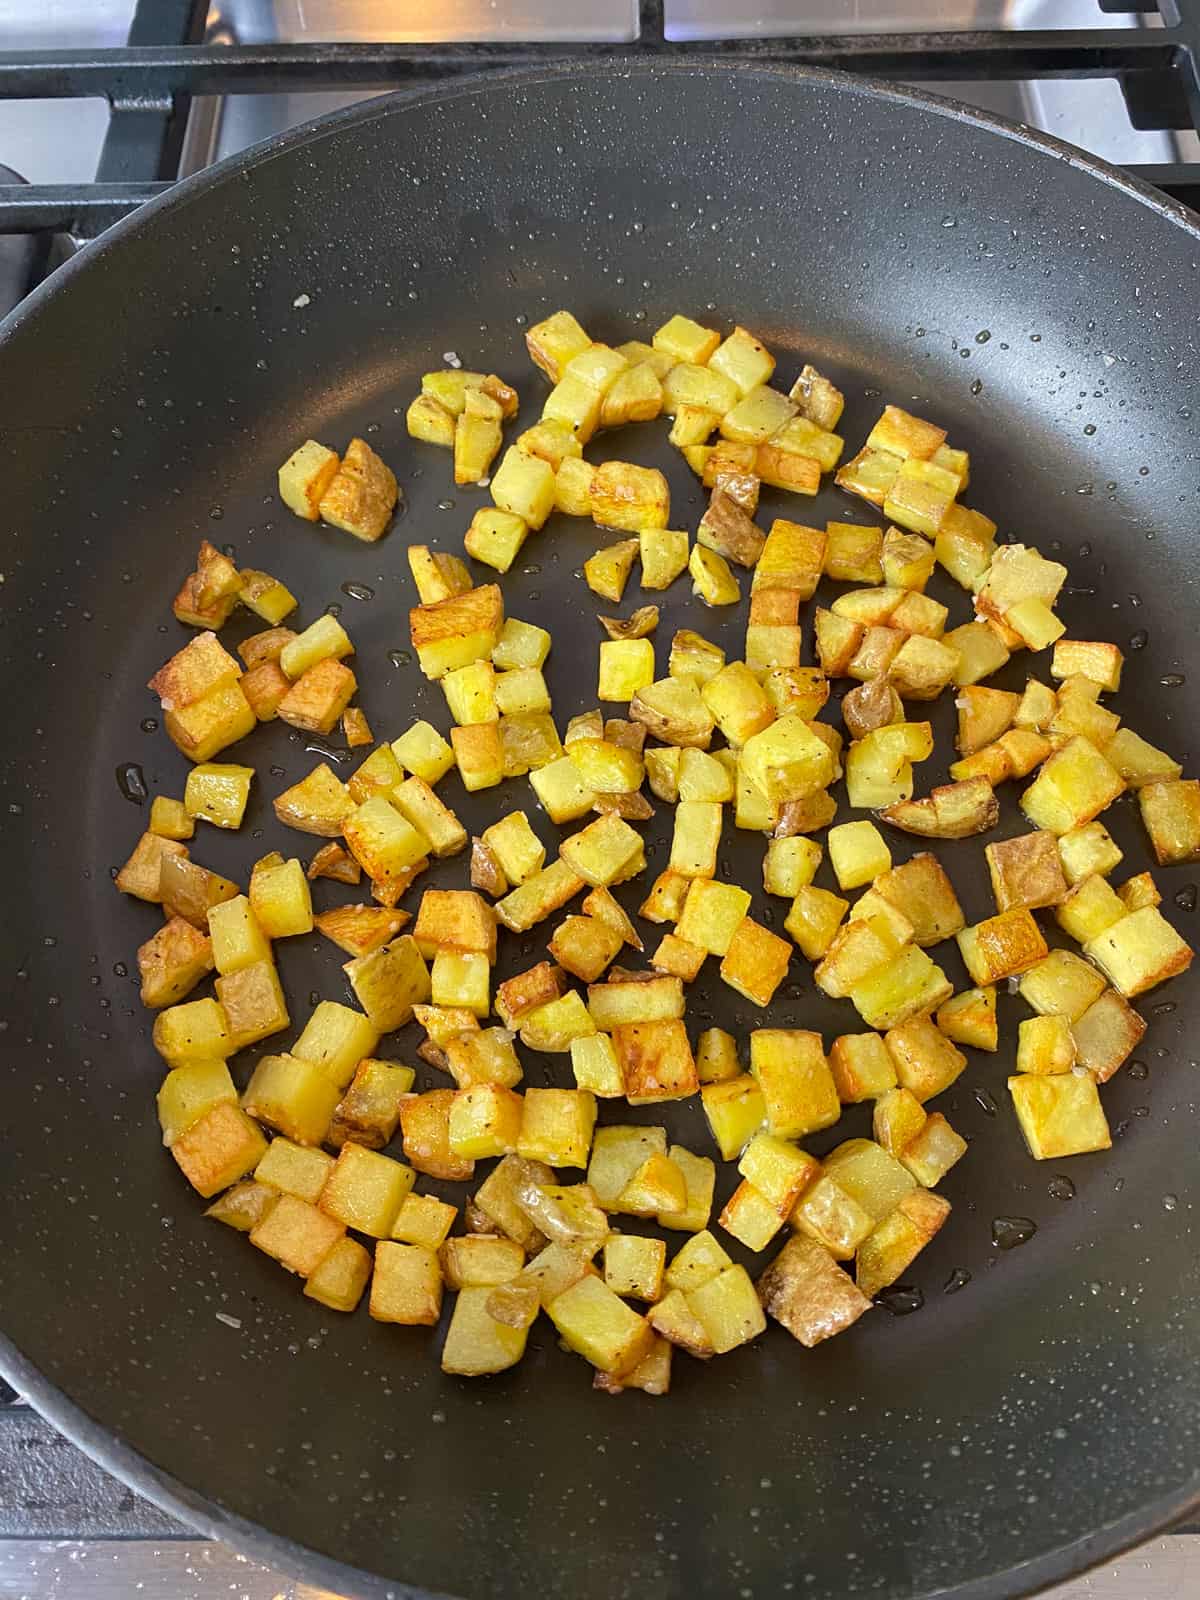 Cook the cubed potatoes until the edges are crispy and golden brown.